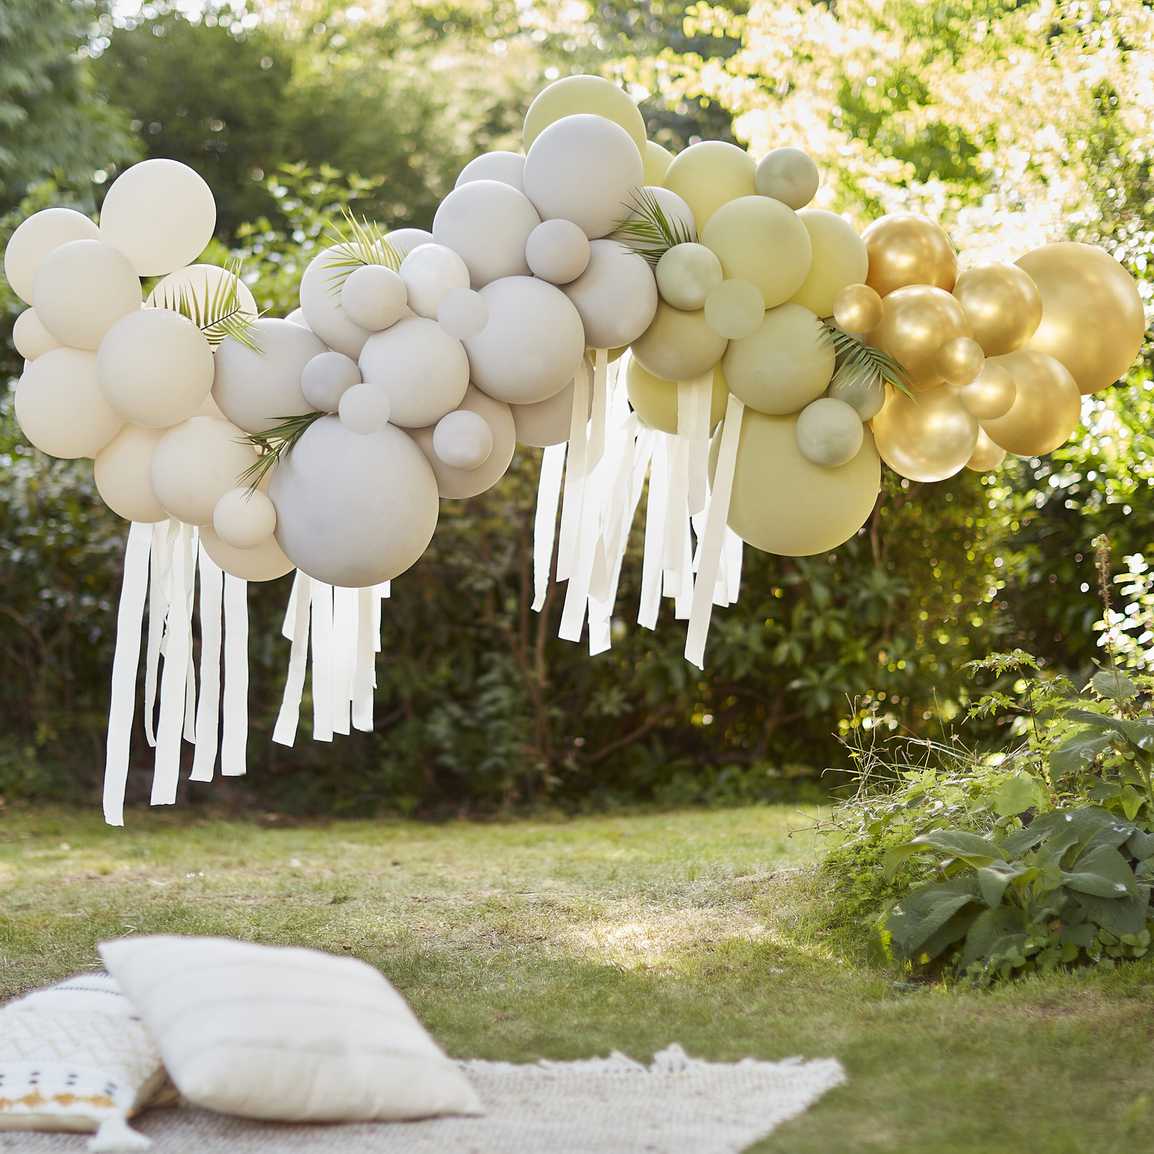 Chrome balloon garland with palm tree branches decoration with 75 balloons